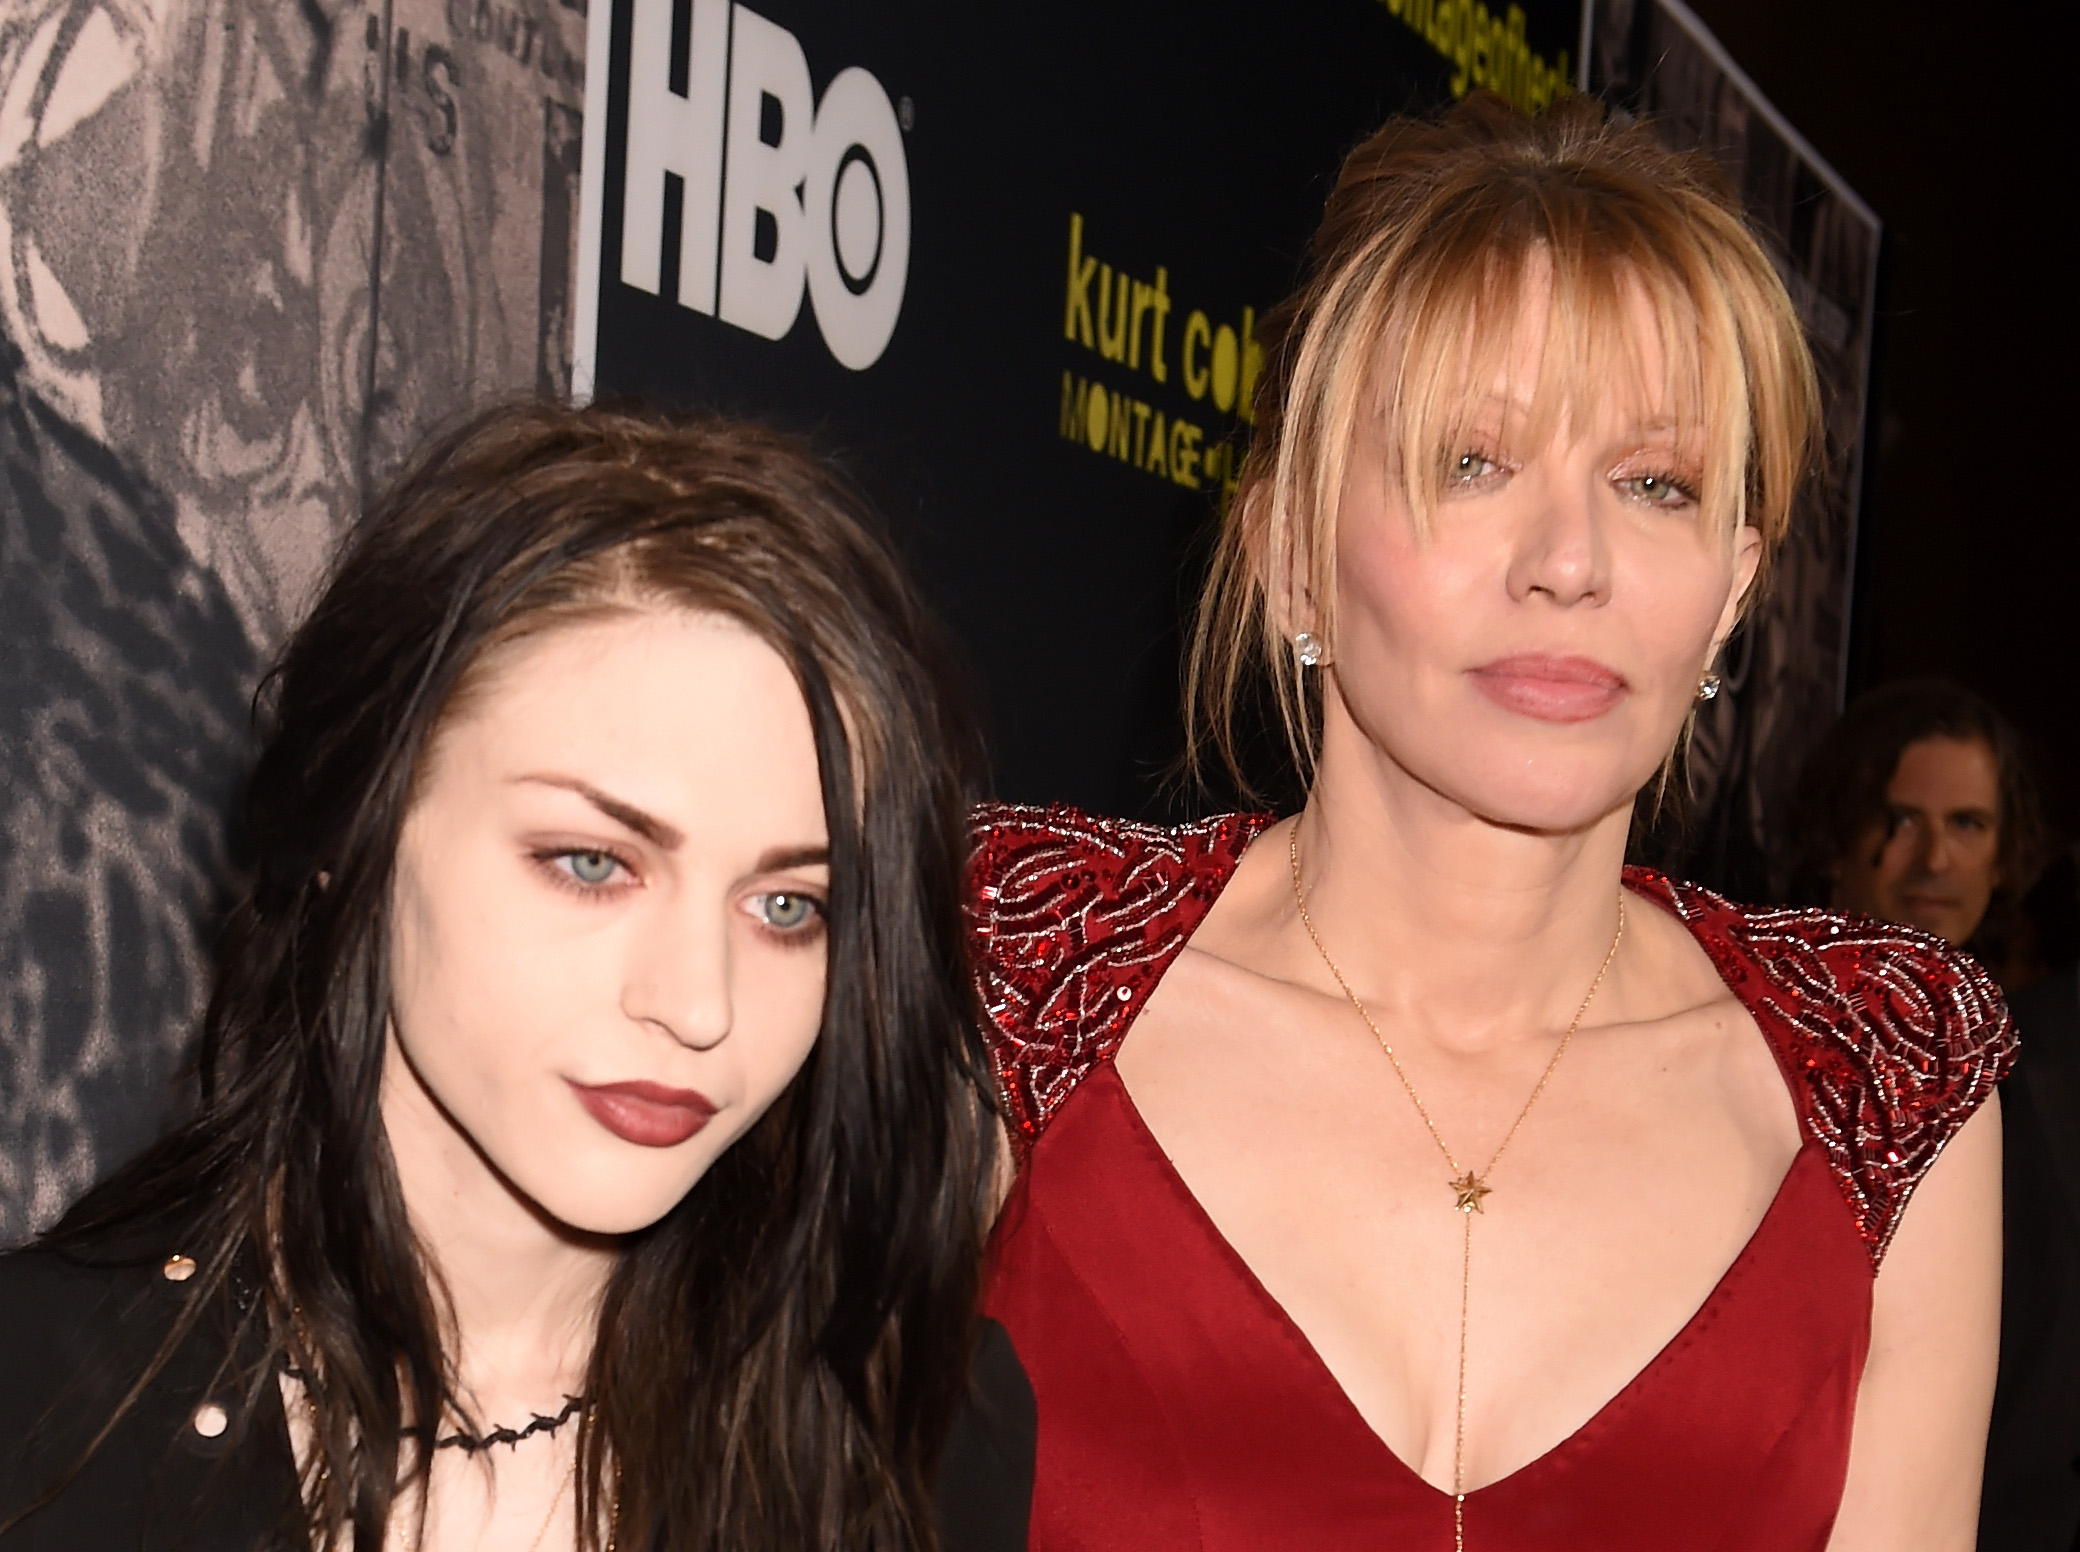 Frances Bean Cobain and Courtney Love attend the Los Angeles Premiere "Kurt Cobain: Editing From Hell" on HBO on April 21, 2015 in Hollywood, California (Photo by Jeff Kravitz/FilmMagic)